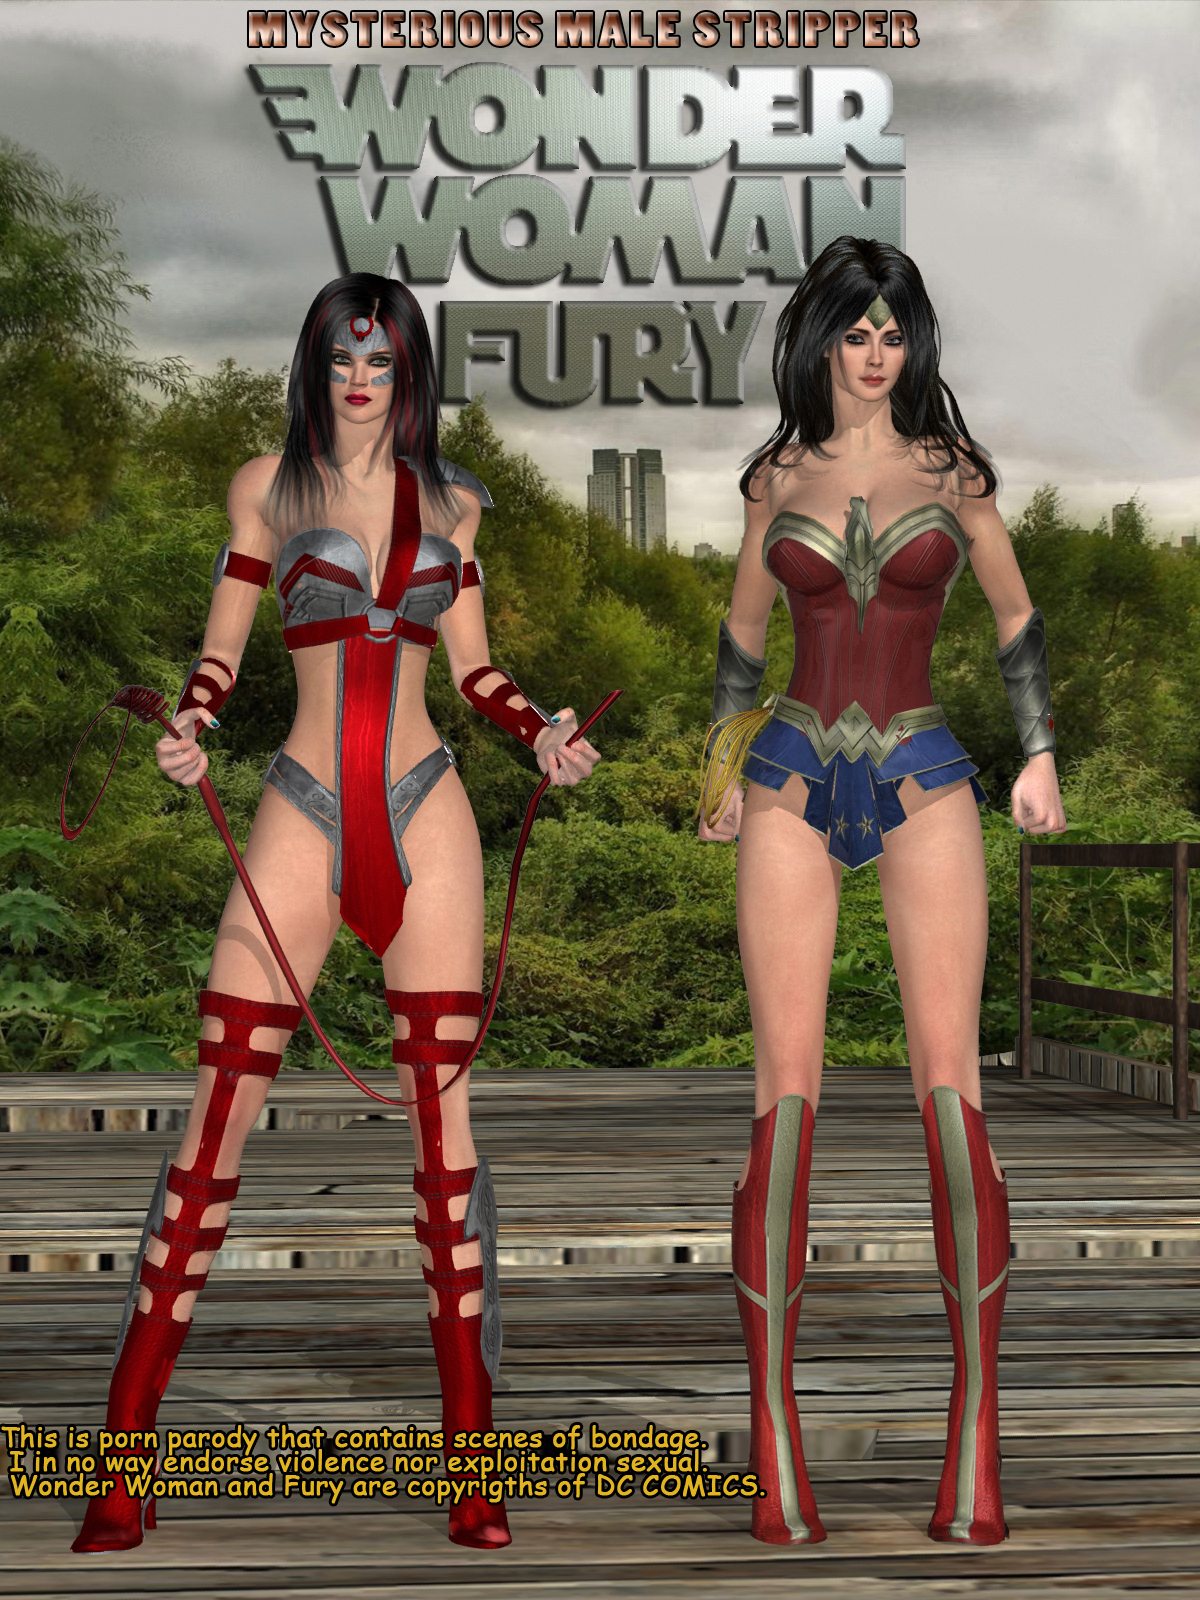 Wonder Woman and Fury in mysterious male stripper by Argento